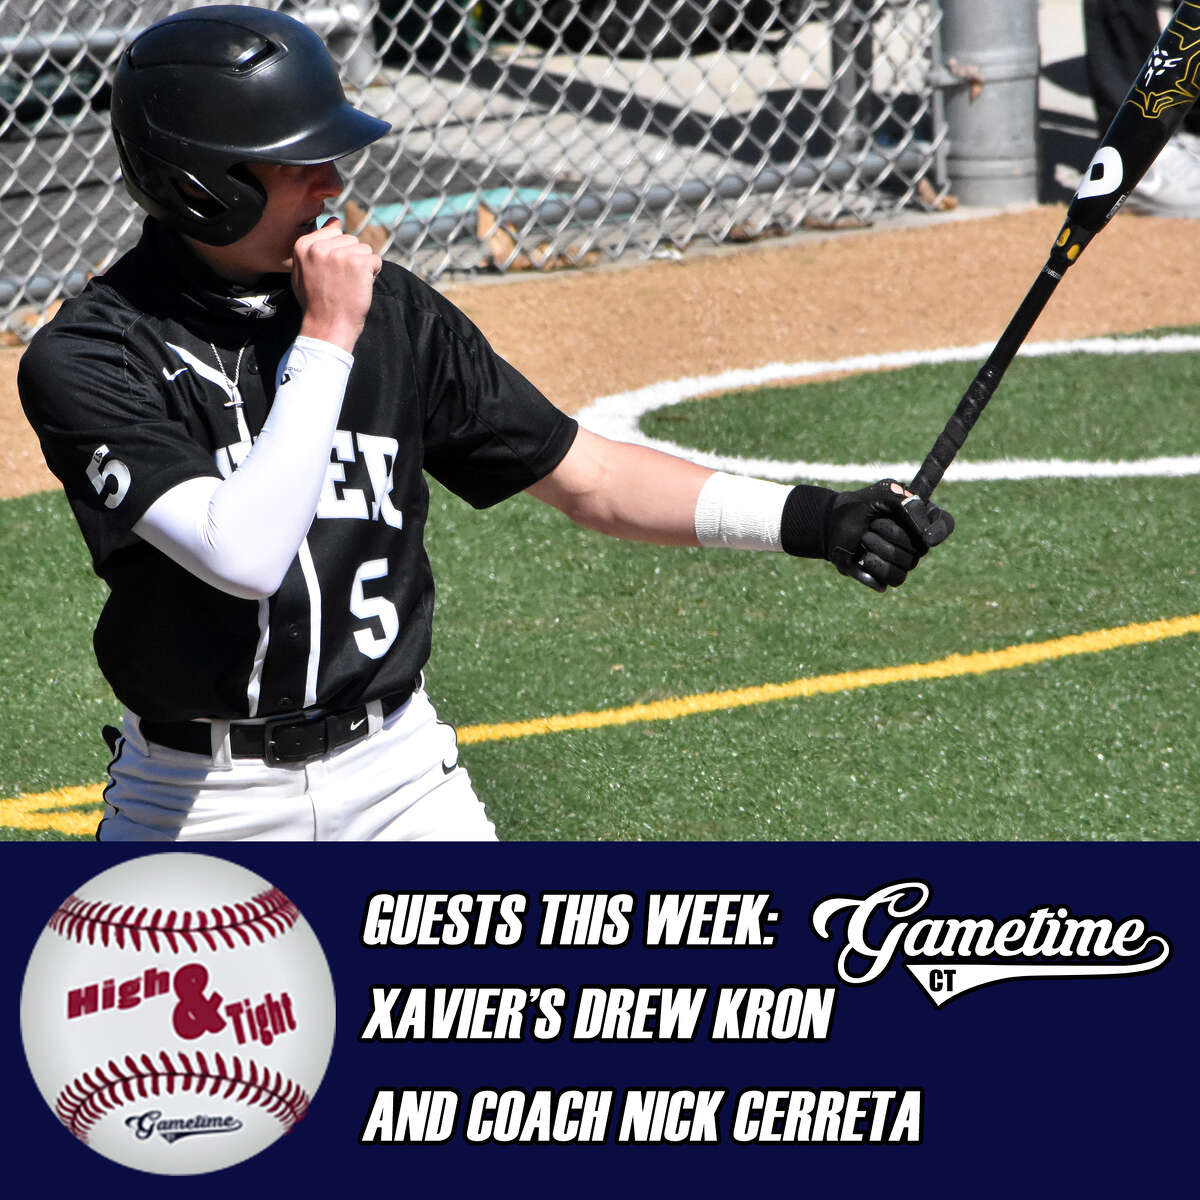 Xavier coach Nick Cerreta and star center fielder, Drew Kron join the latest episode of the High and Tight podcast.